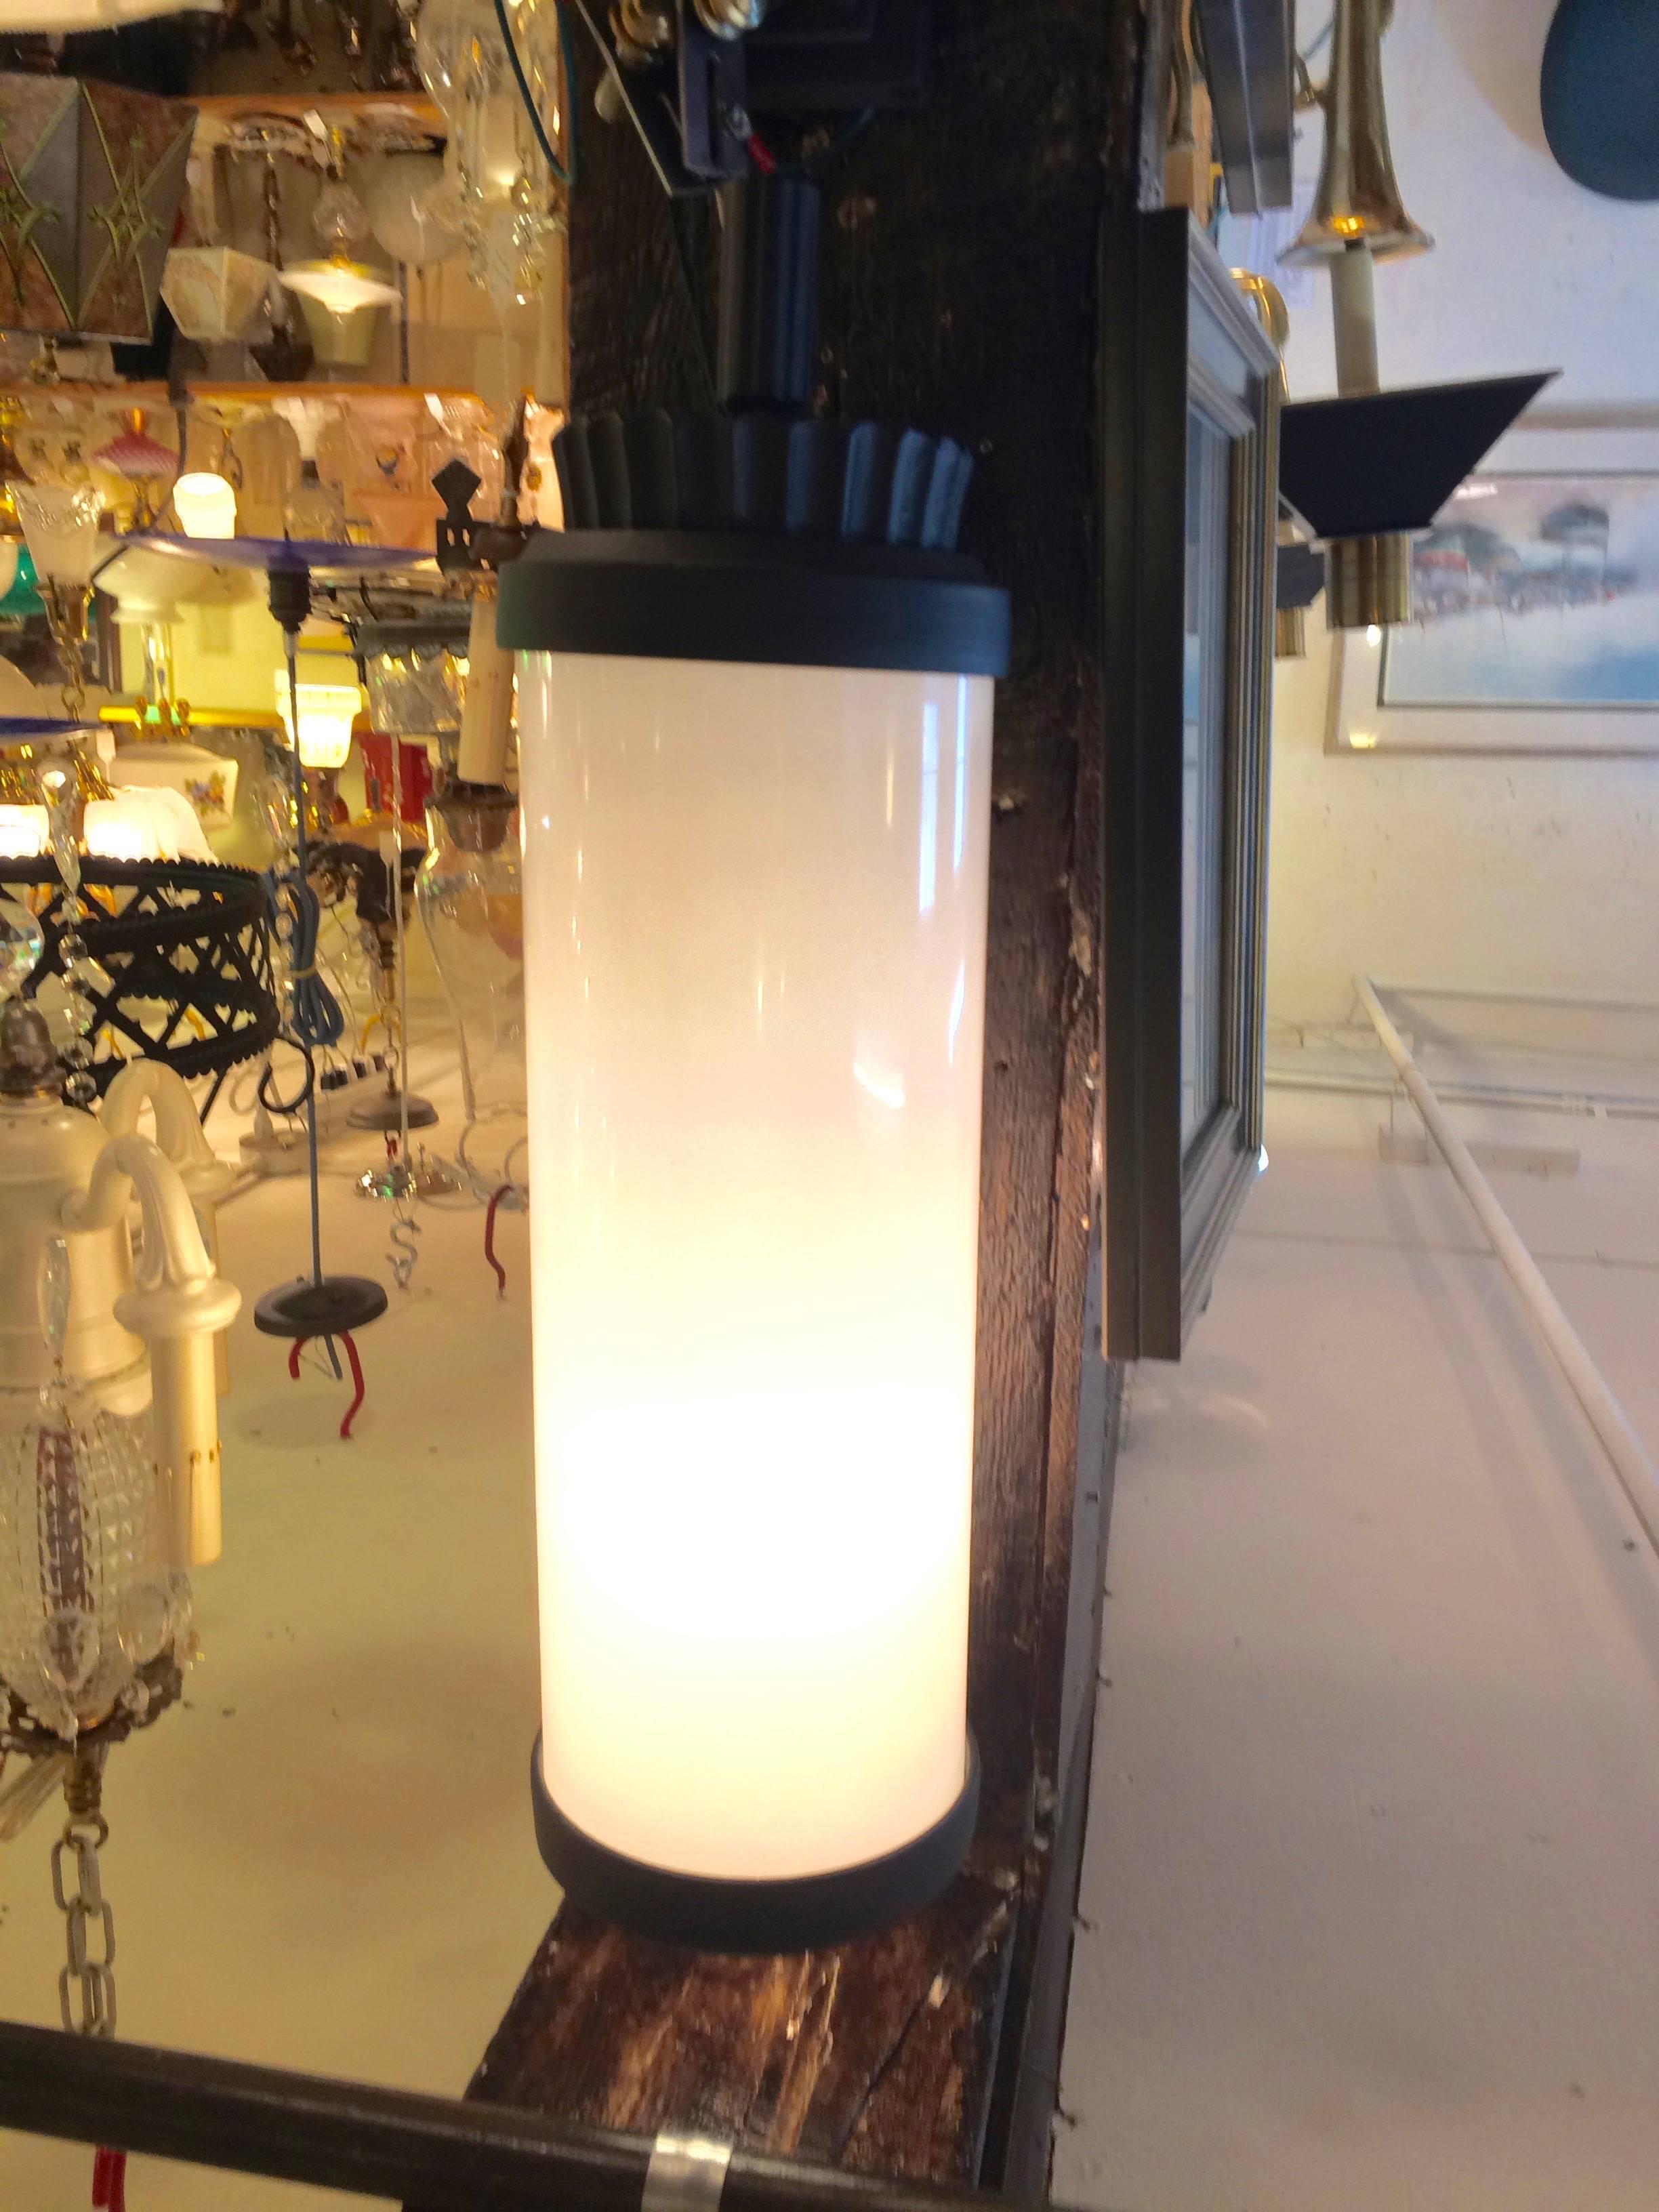 Sensational large pair of column shaped sconces having black metal wall plate and handsome designed top and bottom on each milk glass tube. Can be hung in either direction. The side with no decoration is open, so if used outdoors, would need to be